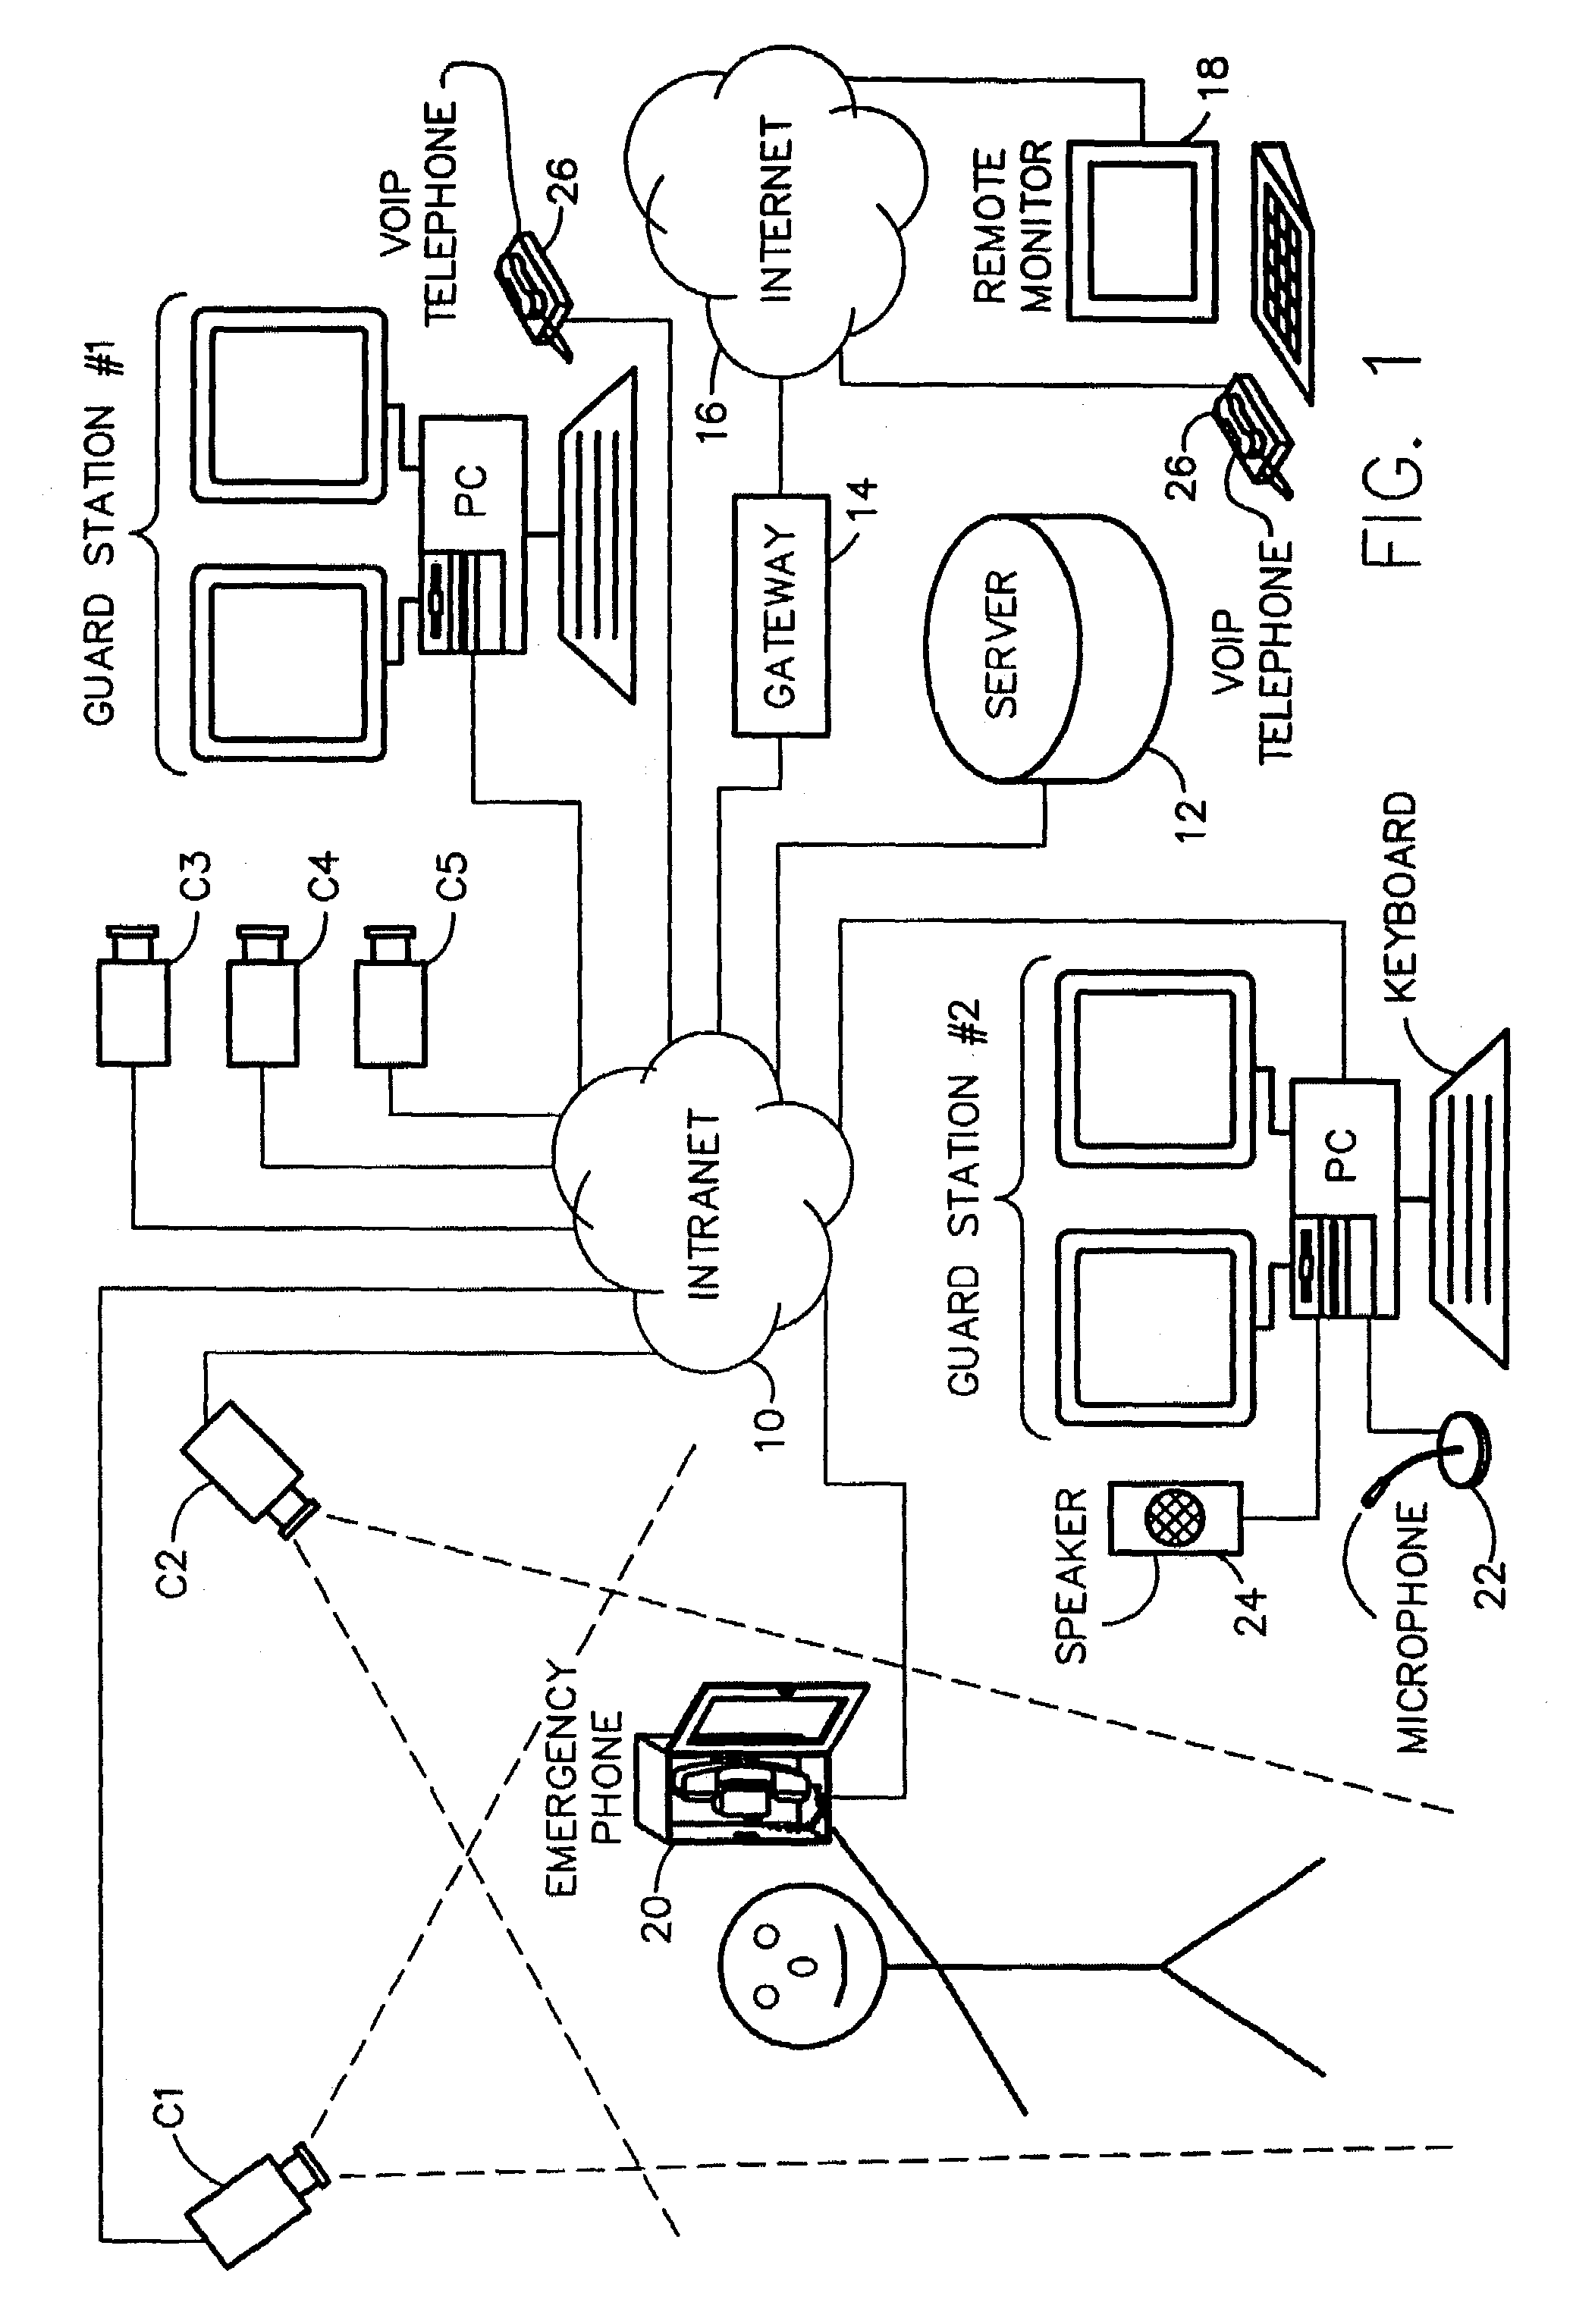 Emergency telephone with integrated surveillance system connectivity